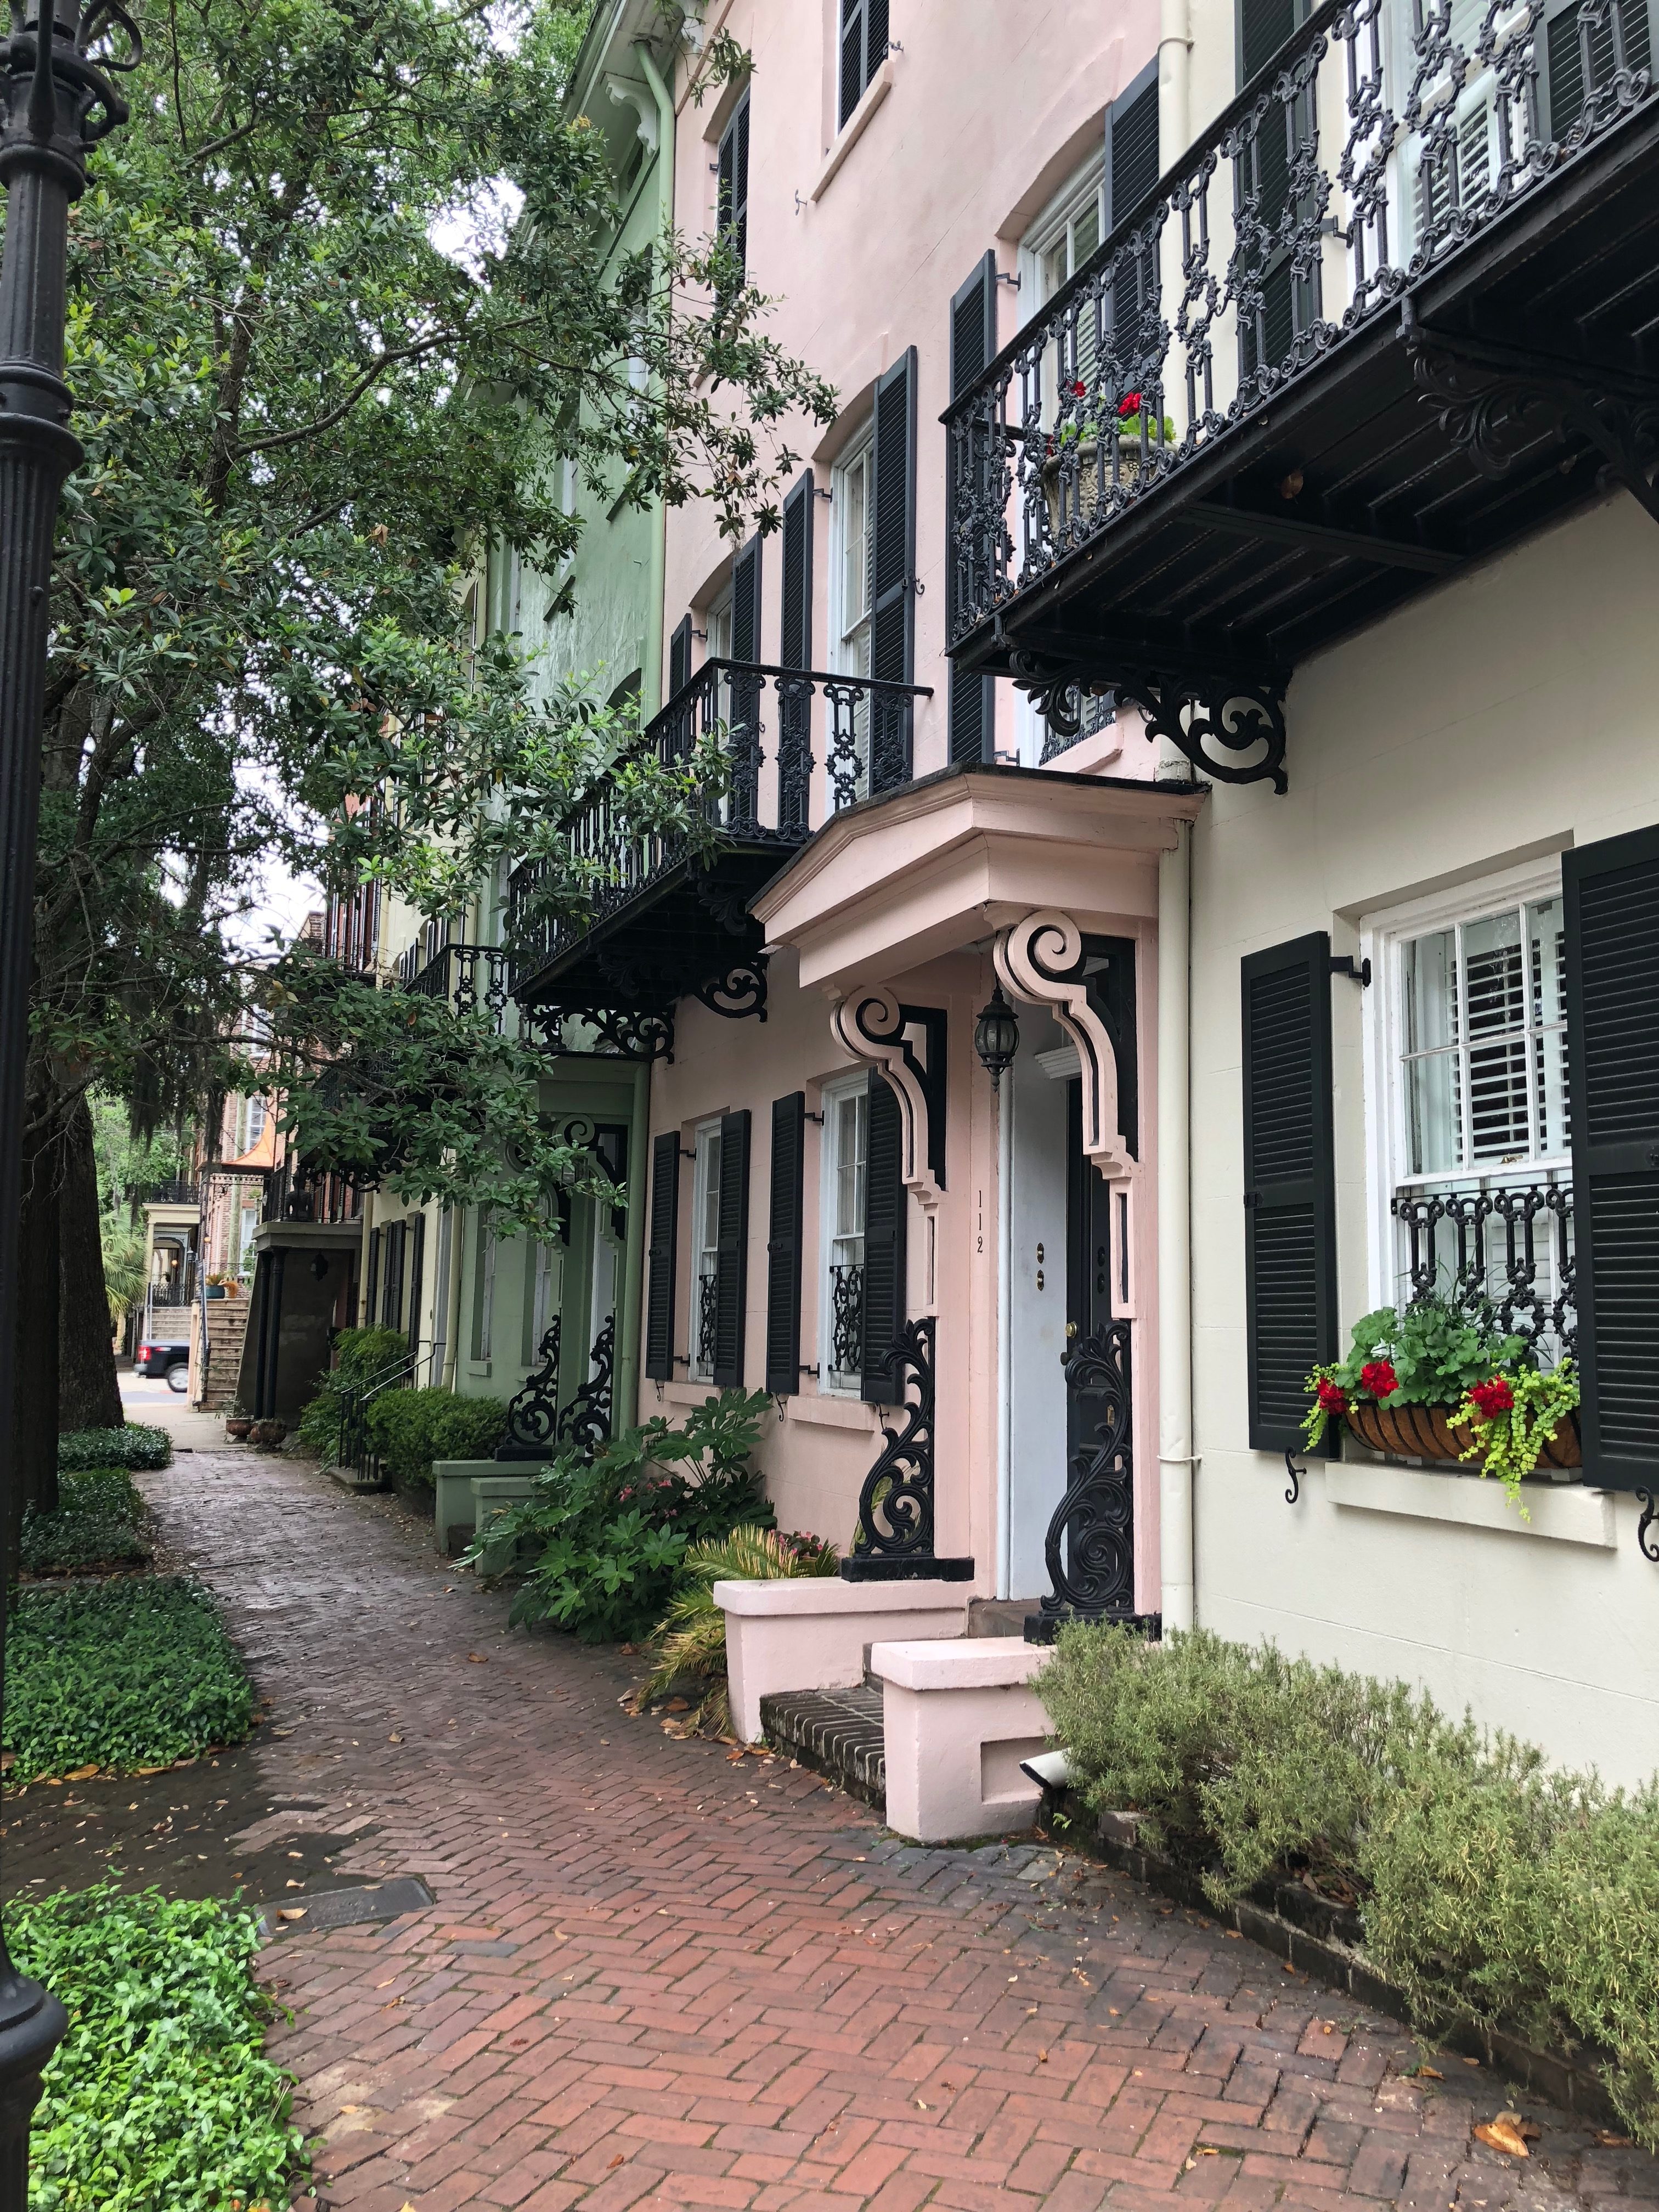 Lifestyle Blogger Chocolate and Lace shares her family trip to 24 Hours in Savannah, Georgia USA.